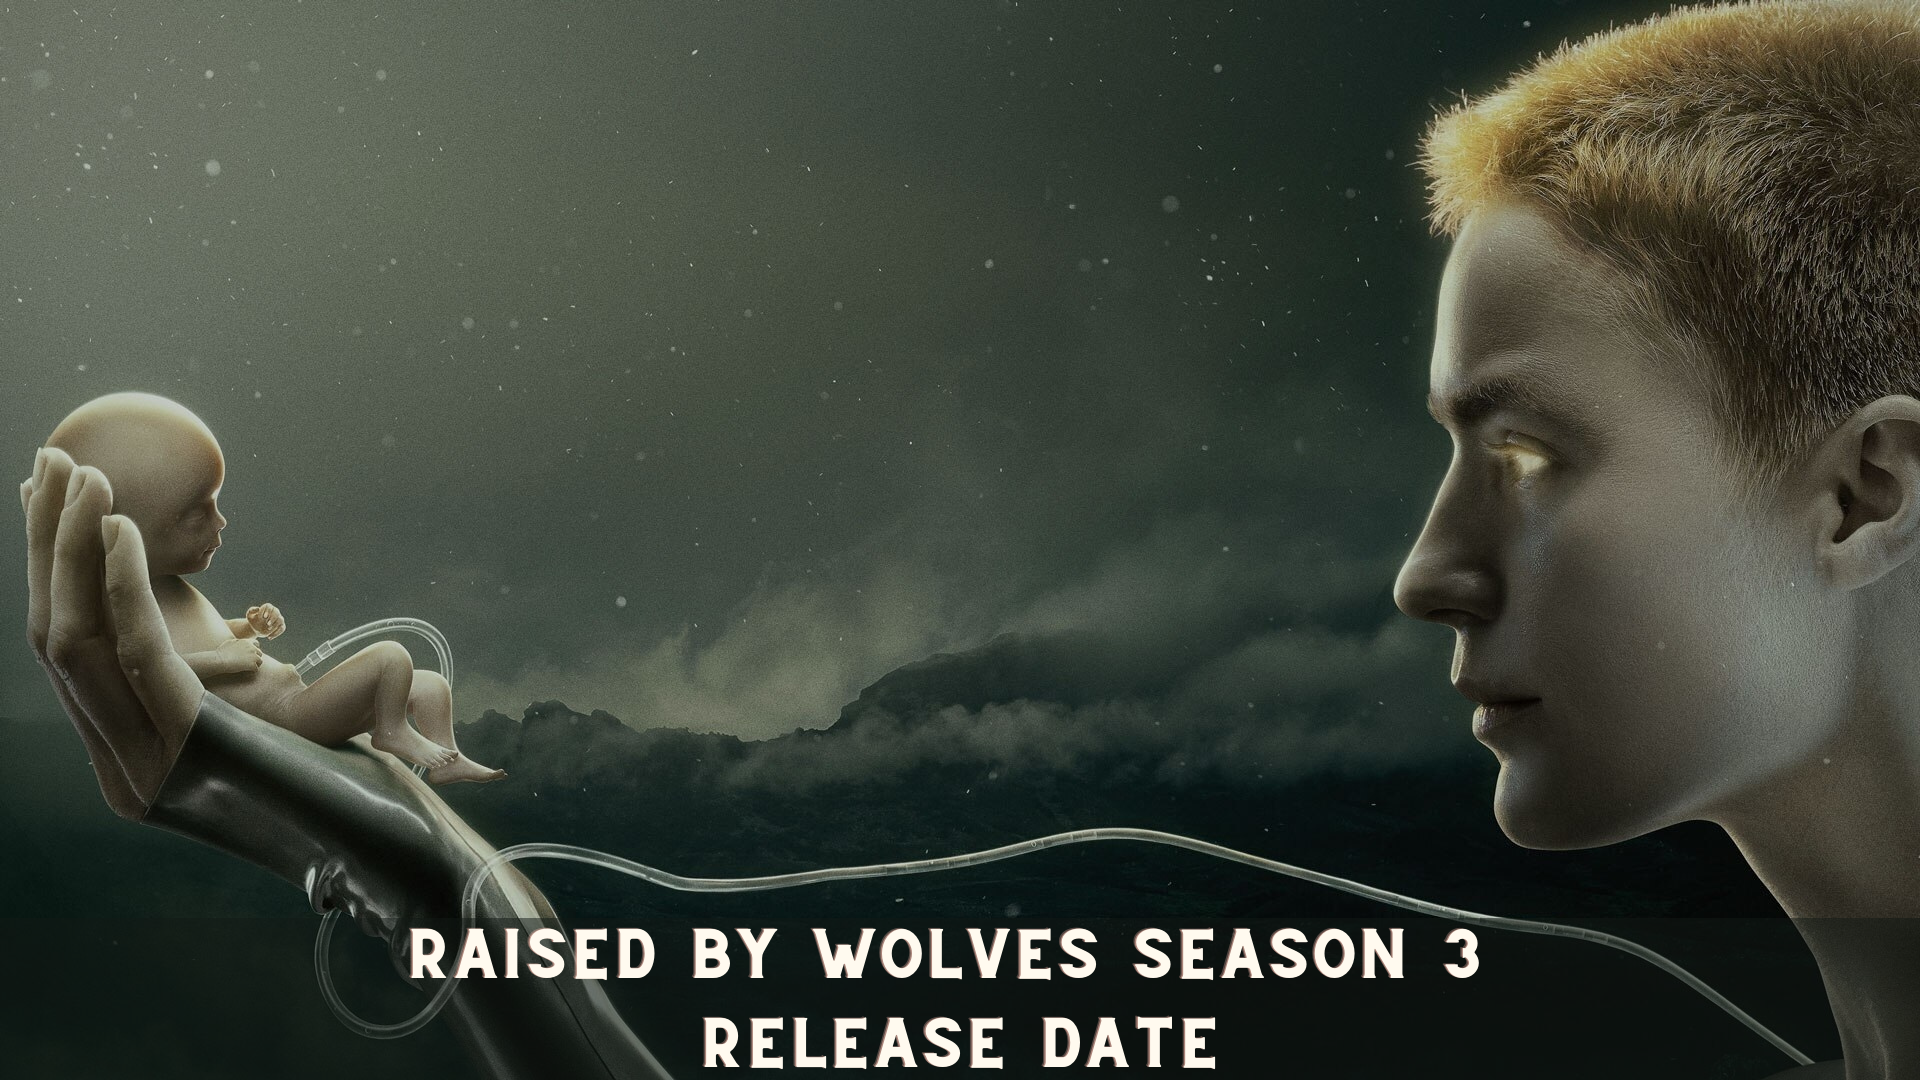 Raised by Wolves Season 3 Release Date